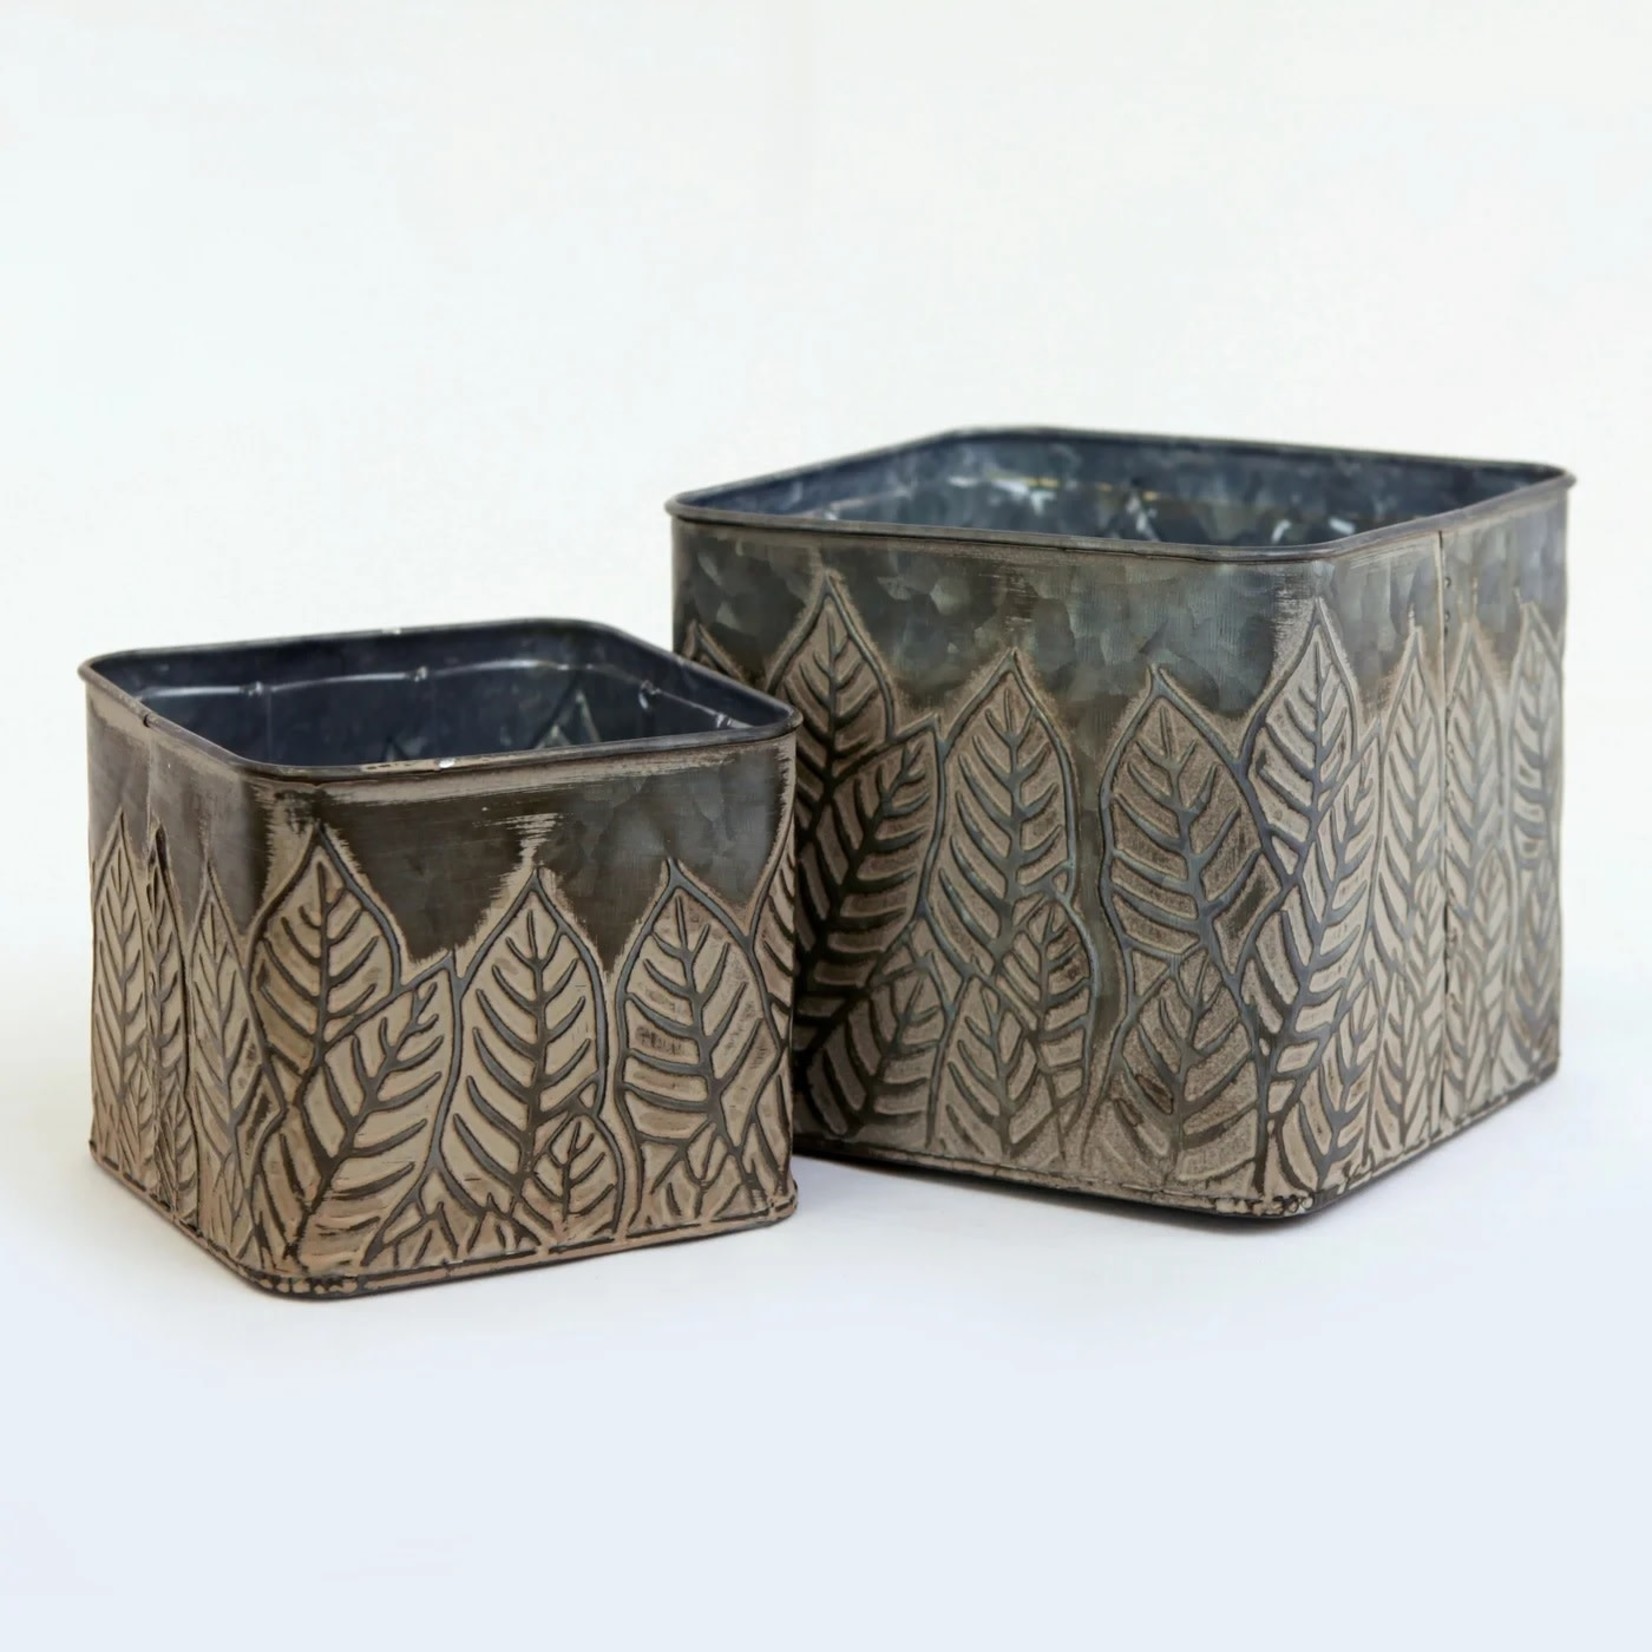 planter Grey w/Leaf Pattern Metal Container, w/Liners - Sm